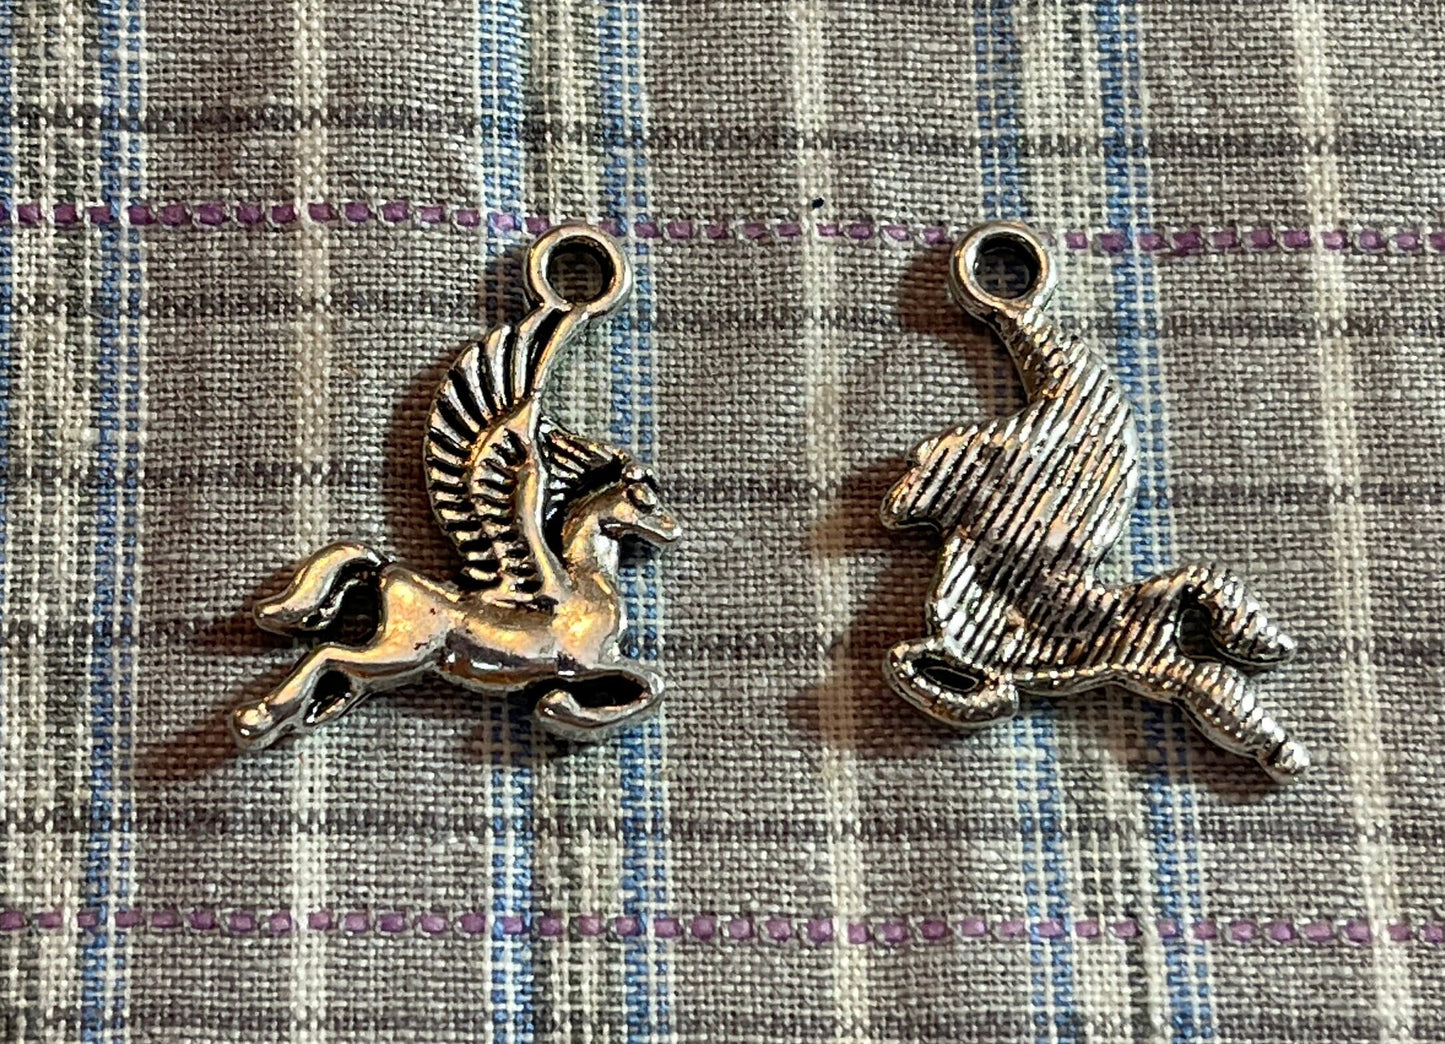 Unicorn and Pegasus charms (flying horse) (mythical beast) Magic Unicorn has horn and flowers in mane, Perseus's mount in flight (pendants)